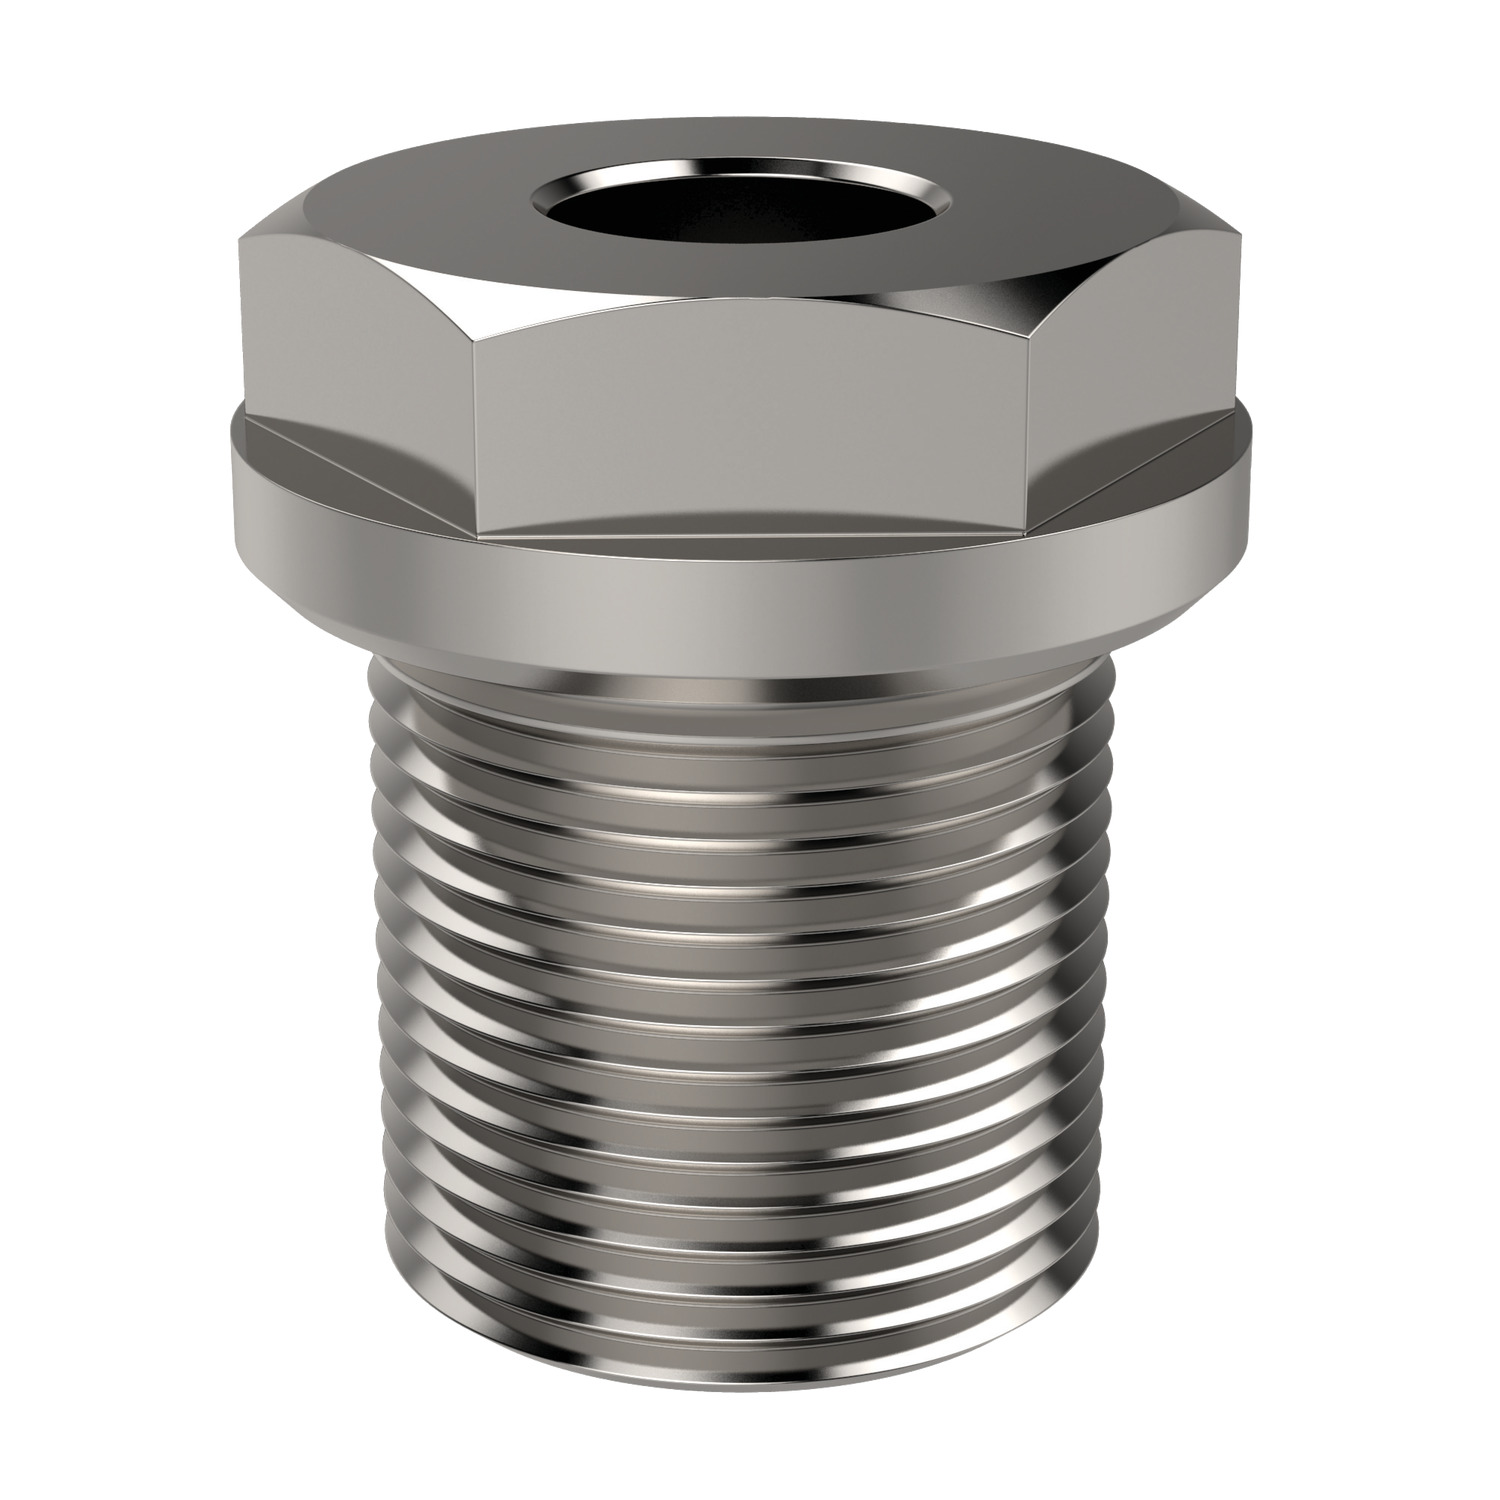 Locating Bushes - for Quick Lift Pins Stainless steel (AISI 630) locating bushes for use with our quick release pins. They allow quick and safe assembly in a variety of materials, including thin walled parts.